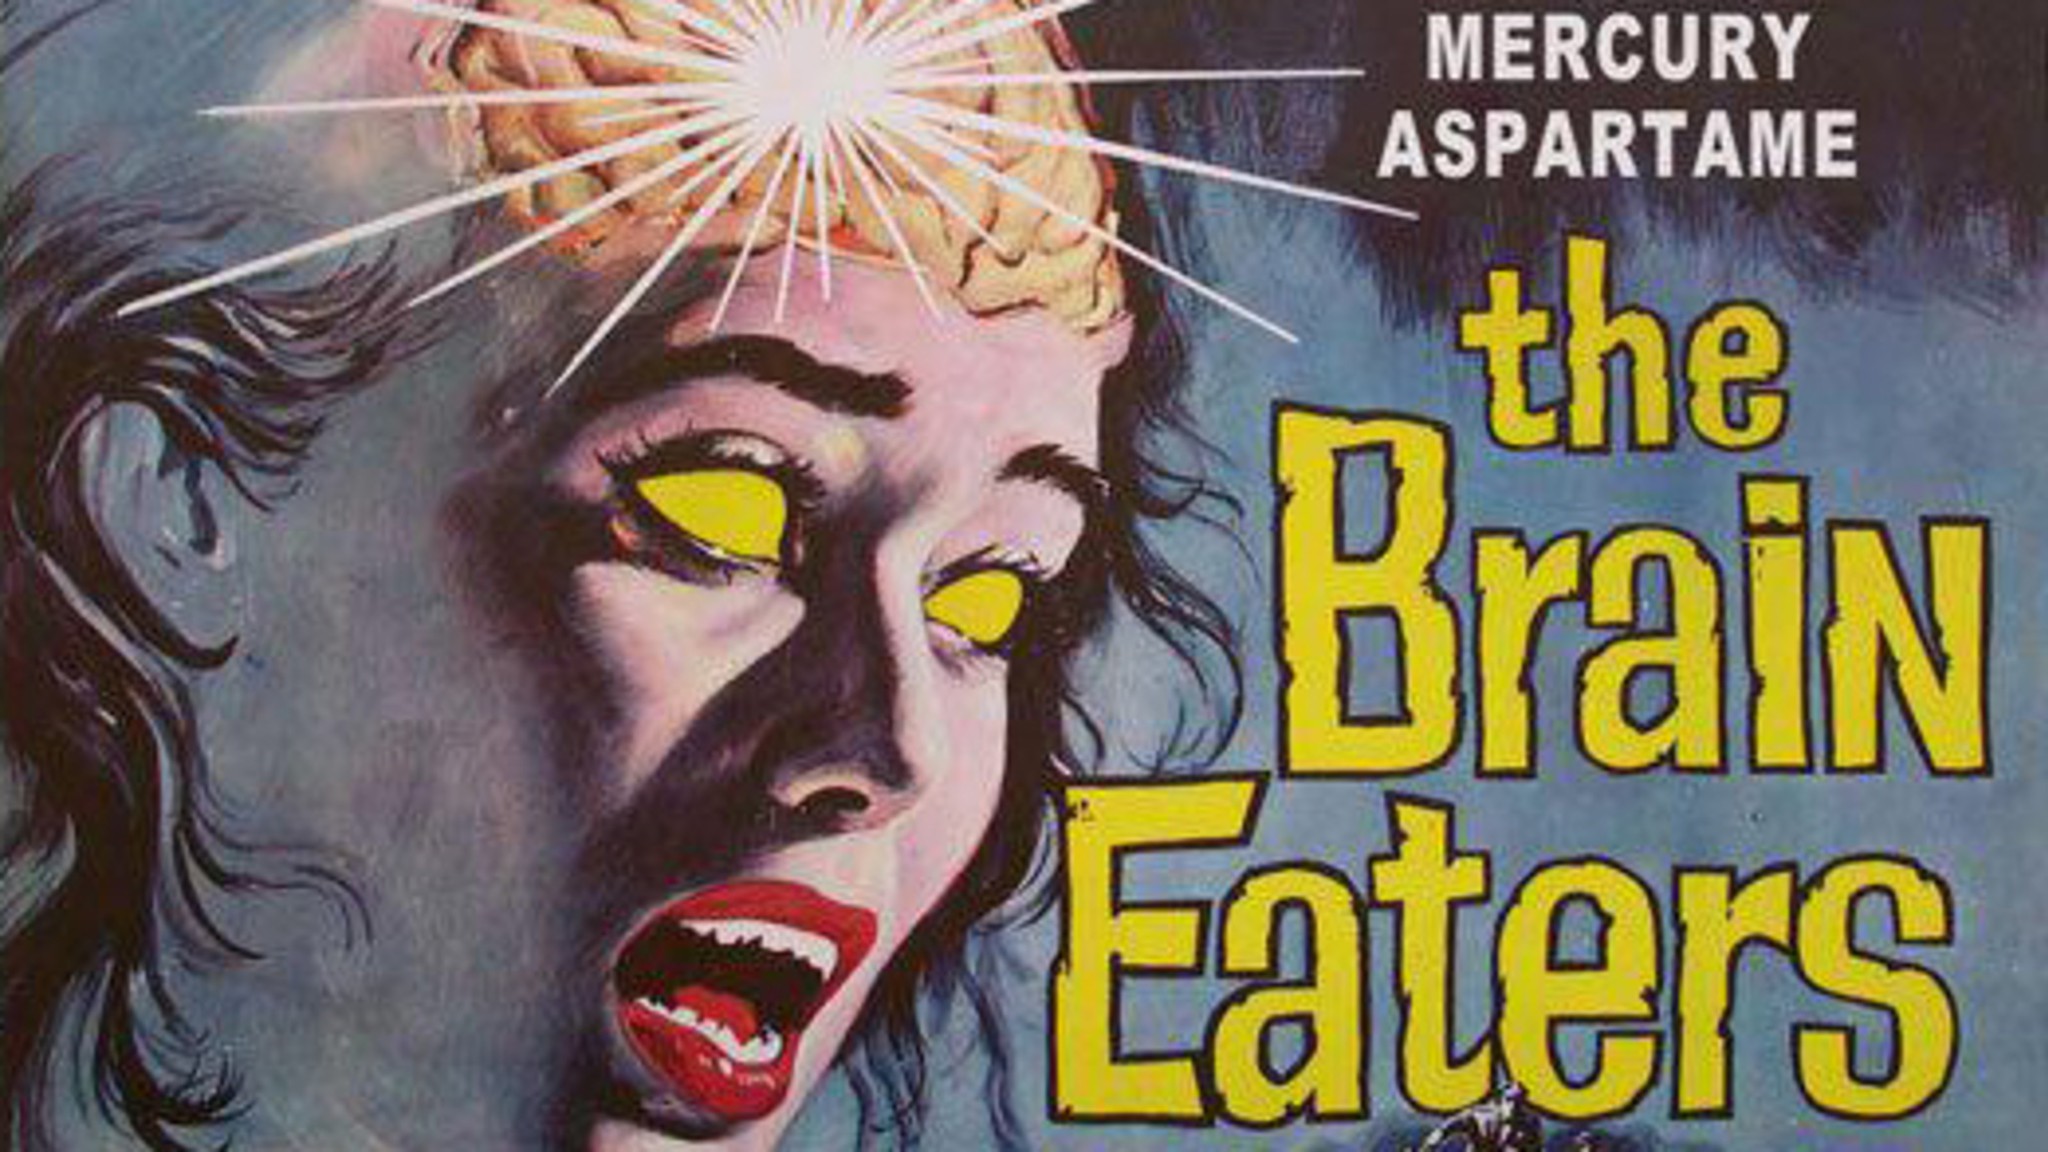 Adaptation of a 1958 sci-fi horror film poster meant to suggest scientific organizations conspire to harm people through fluoride, mercury, and aspartame exposure.